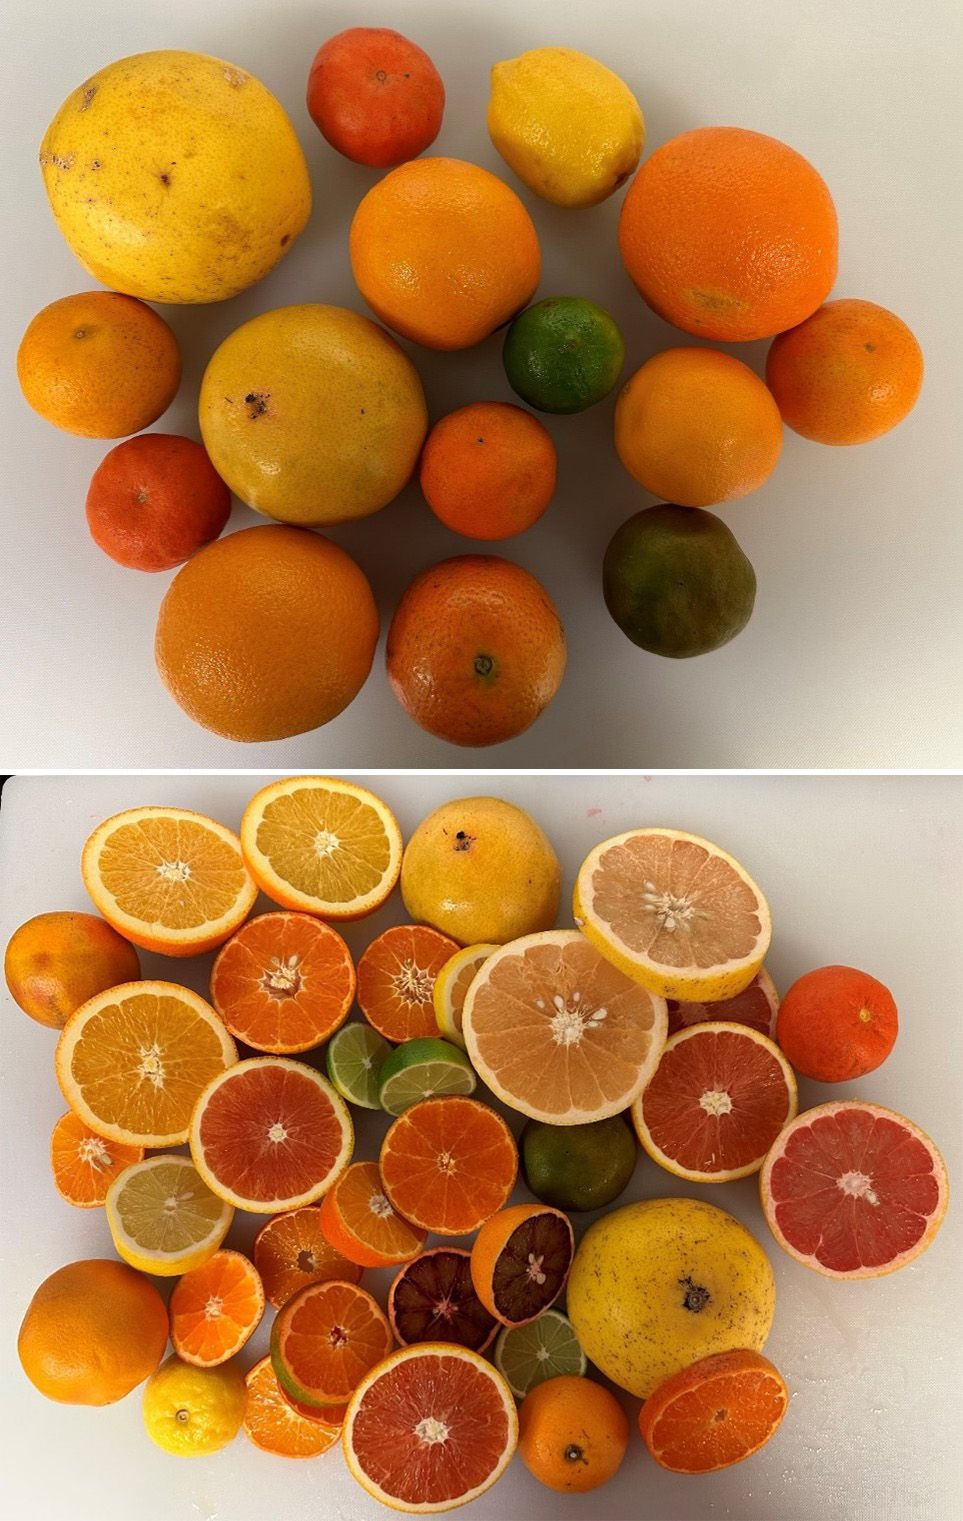 The diversity in fruit size, peel, and flesh color in citrus fruit species.